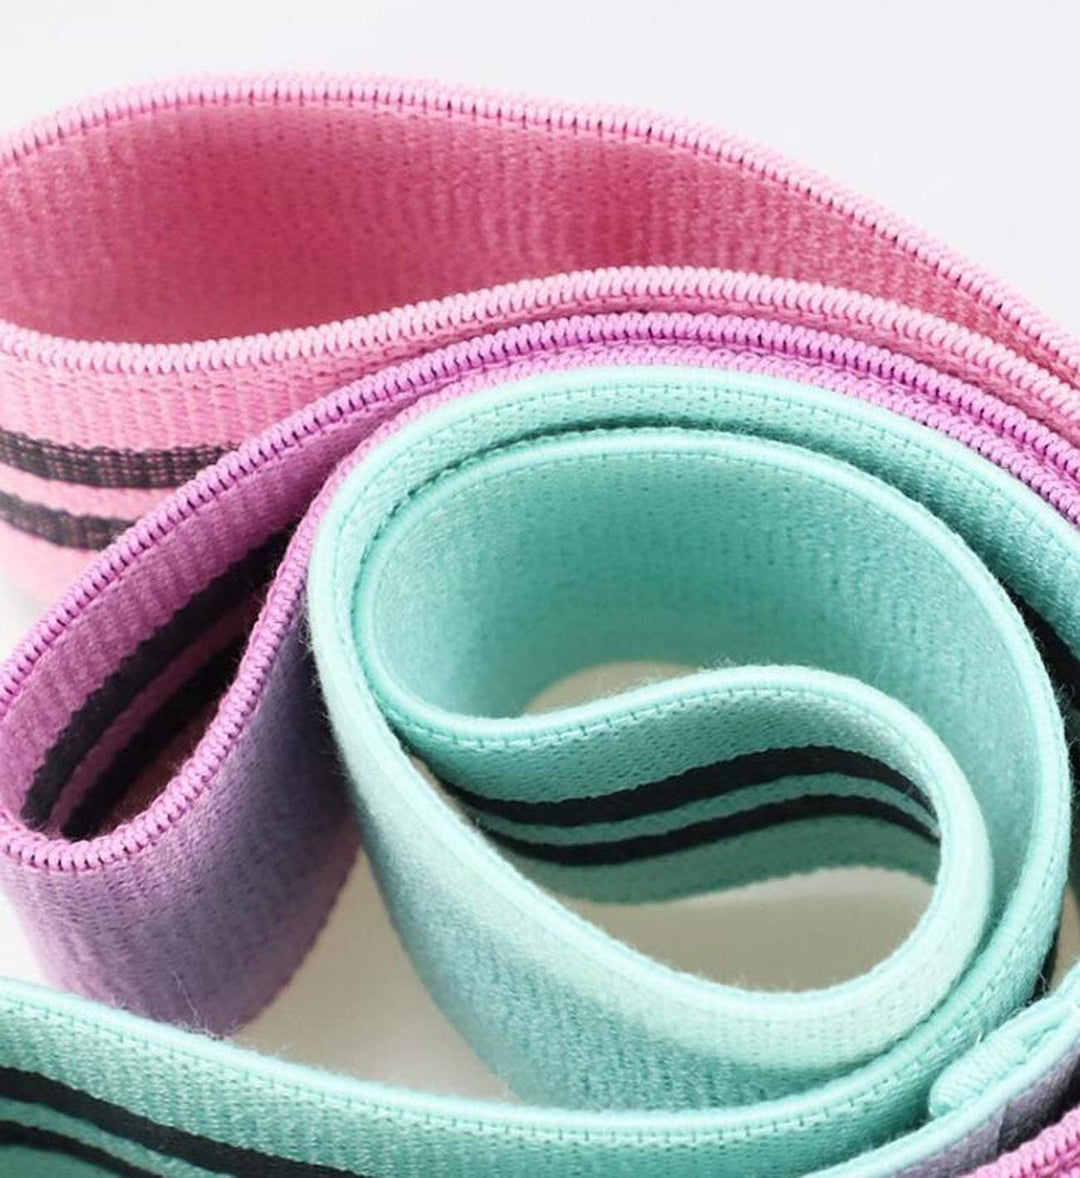 3 Set Fabric Resistance Bands for Hip Glute Squats Lunges, Breathable, Non-Slip